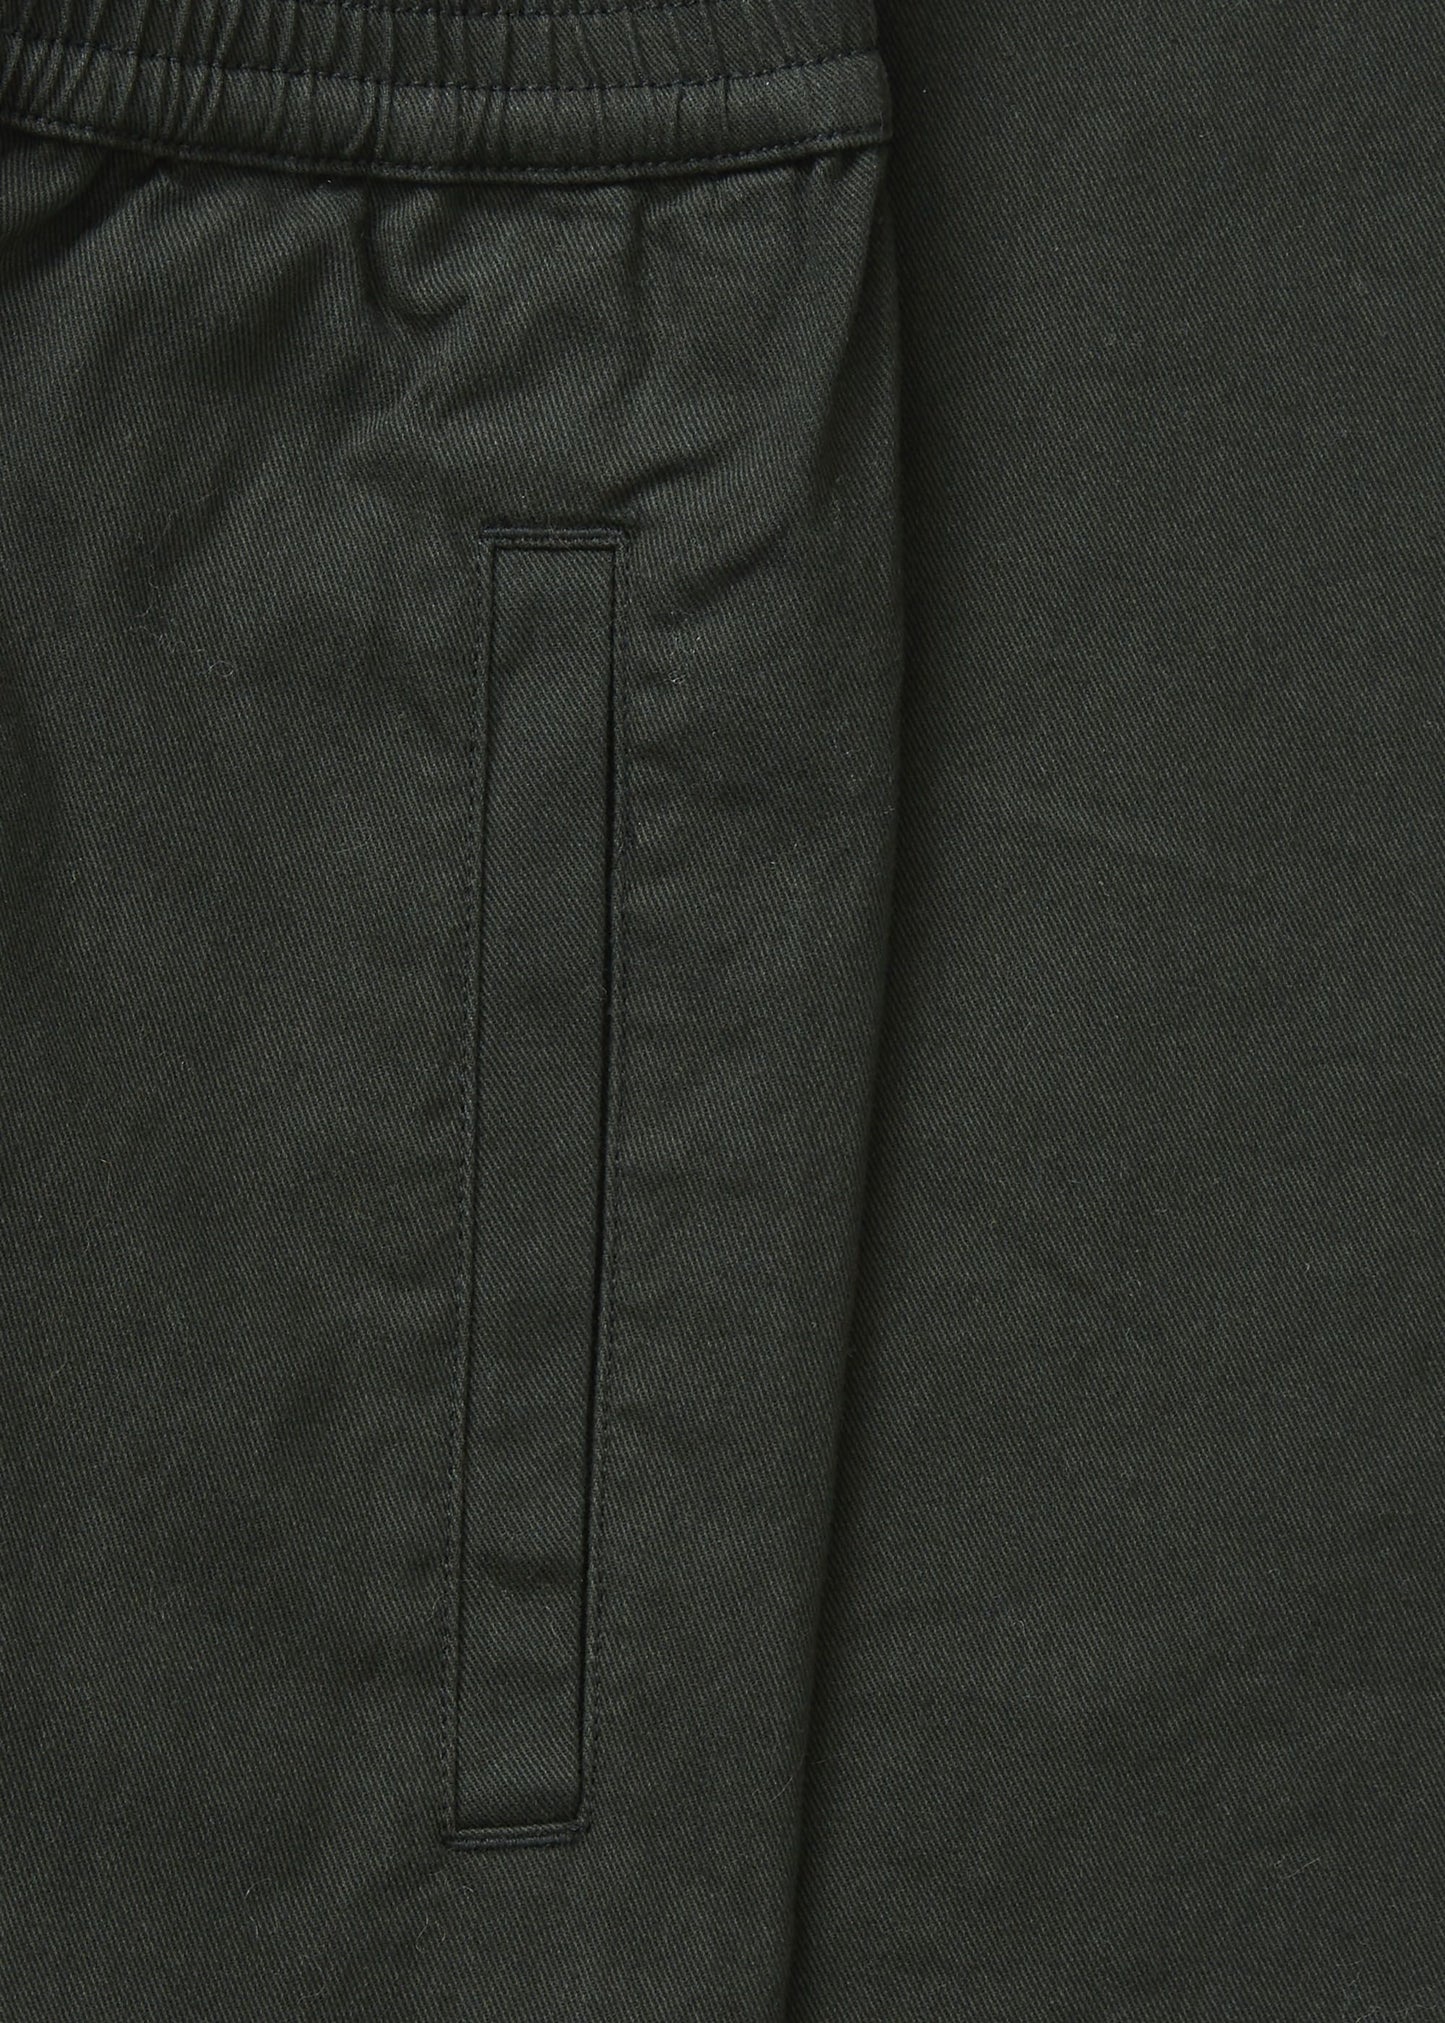 Aiayu "Coco Pant Twill" Virgin Oil